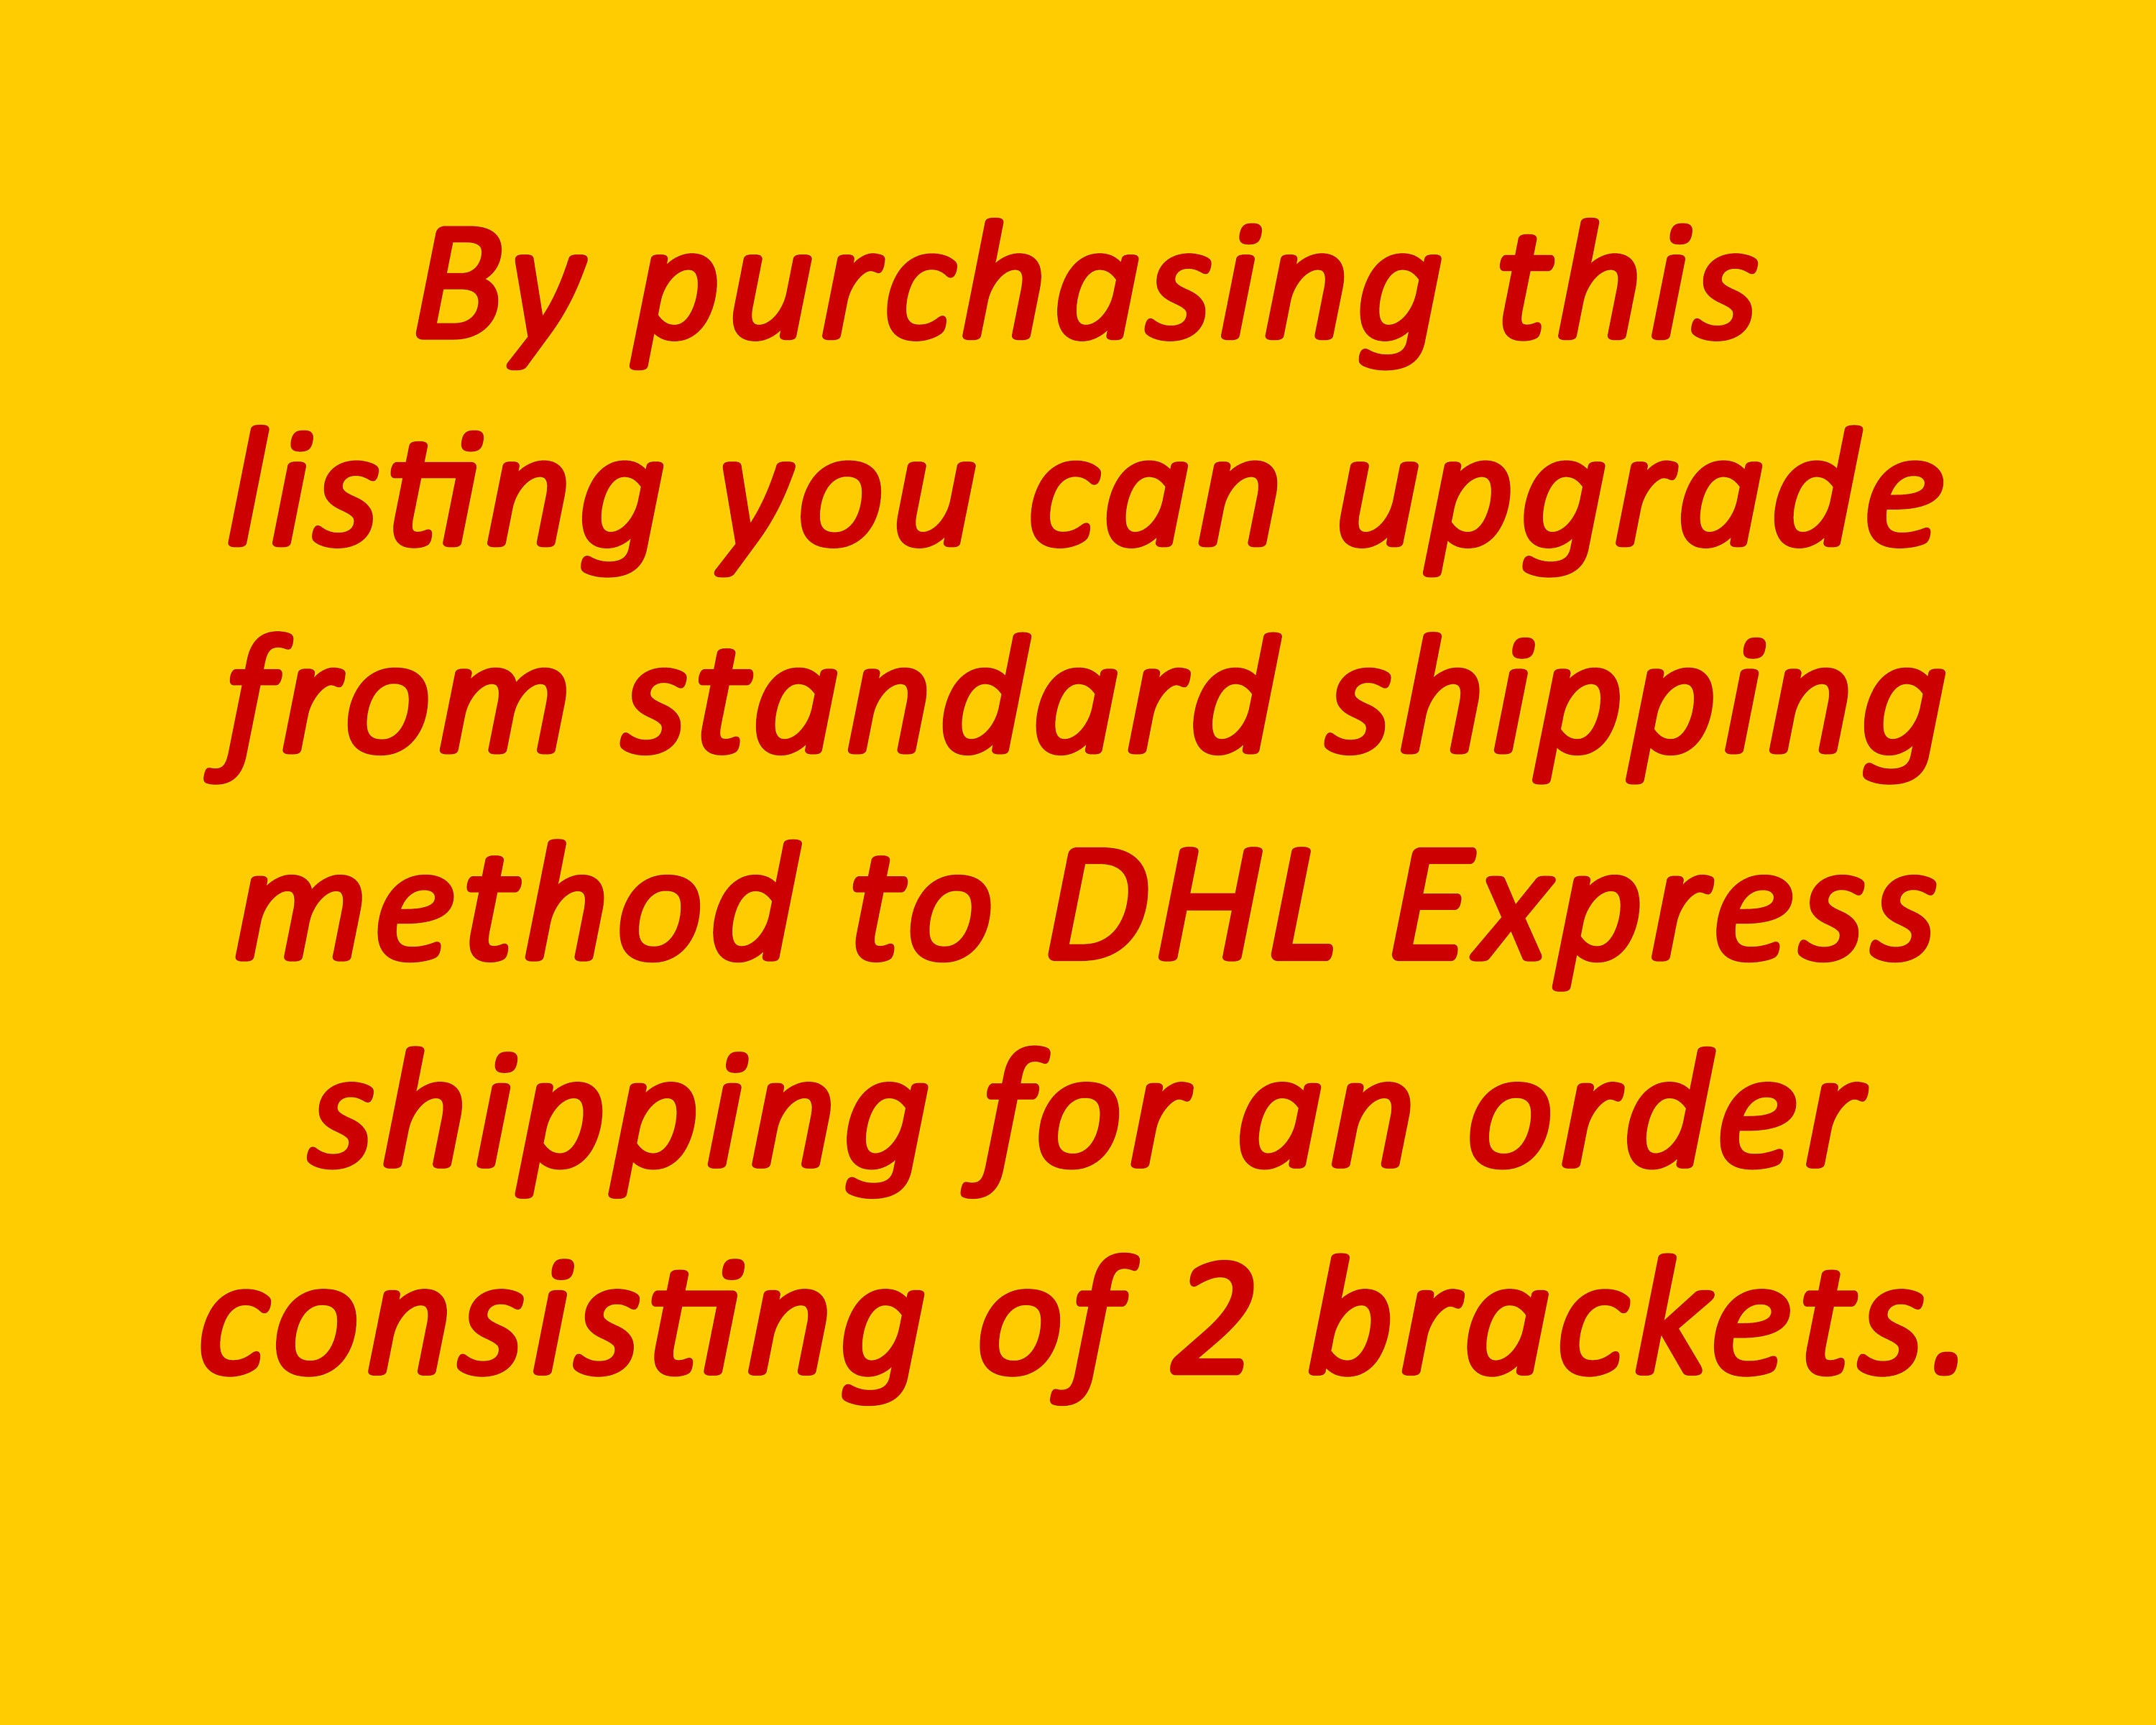 DHL Express shipping upgrade for 2 brackets - Phone Number Needed